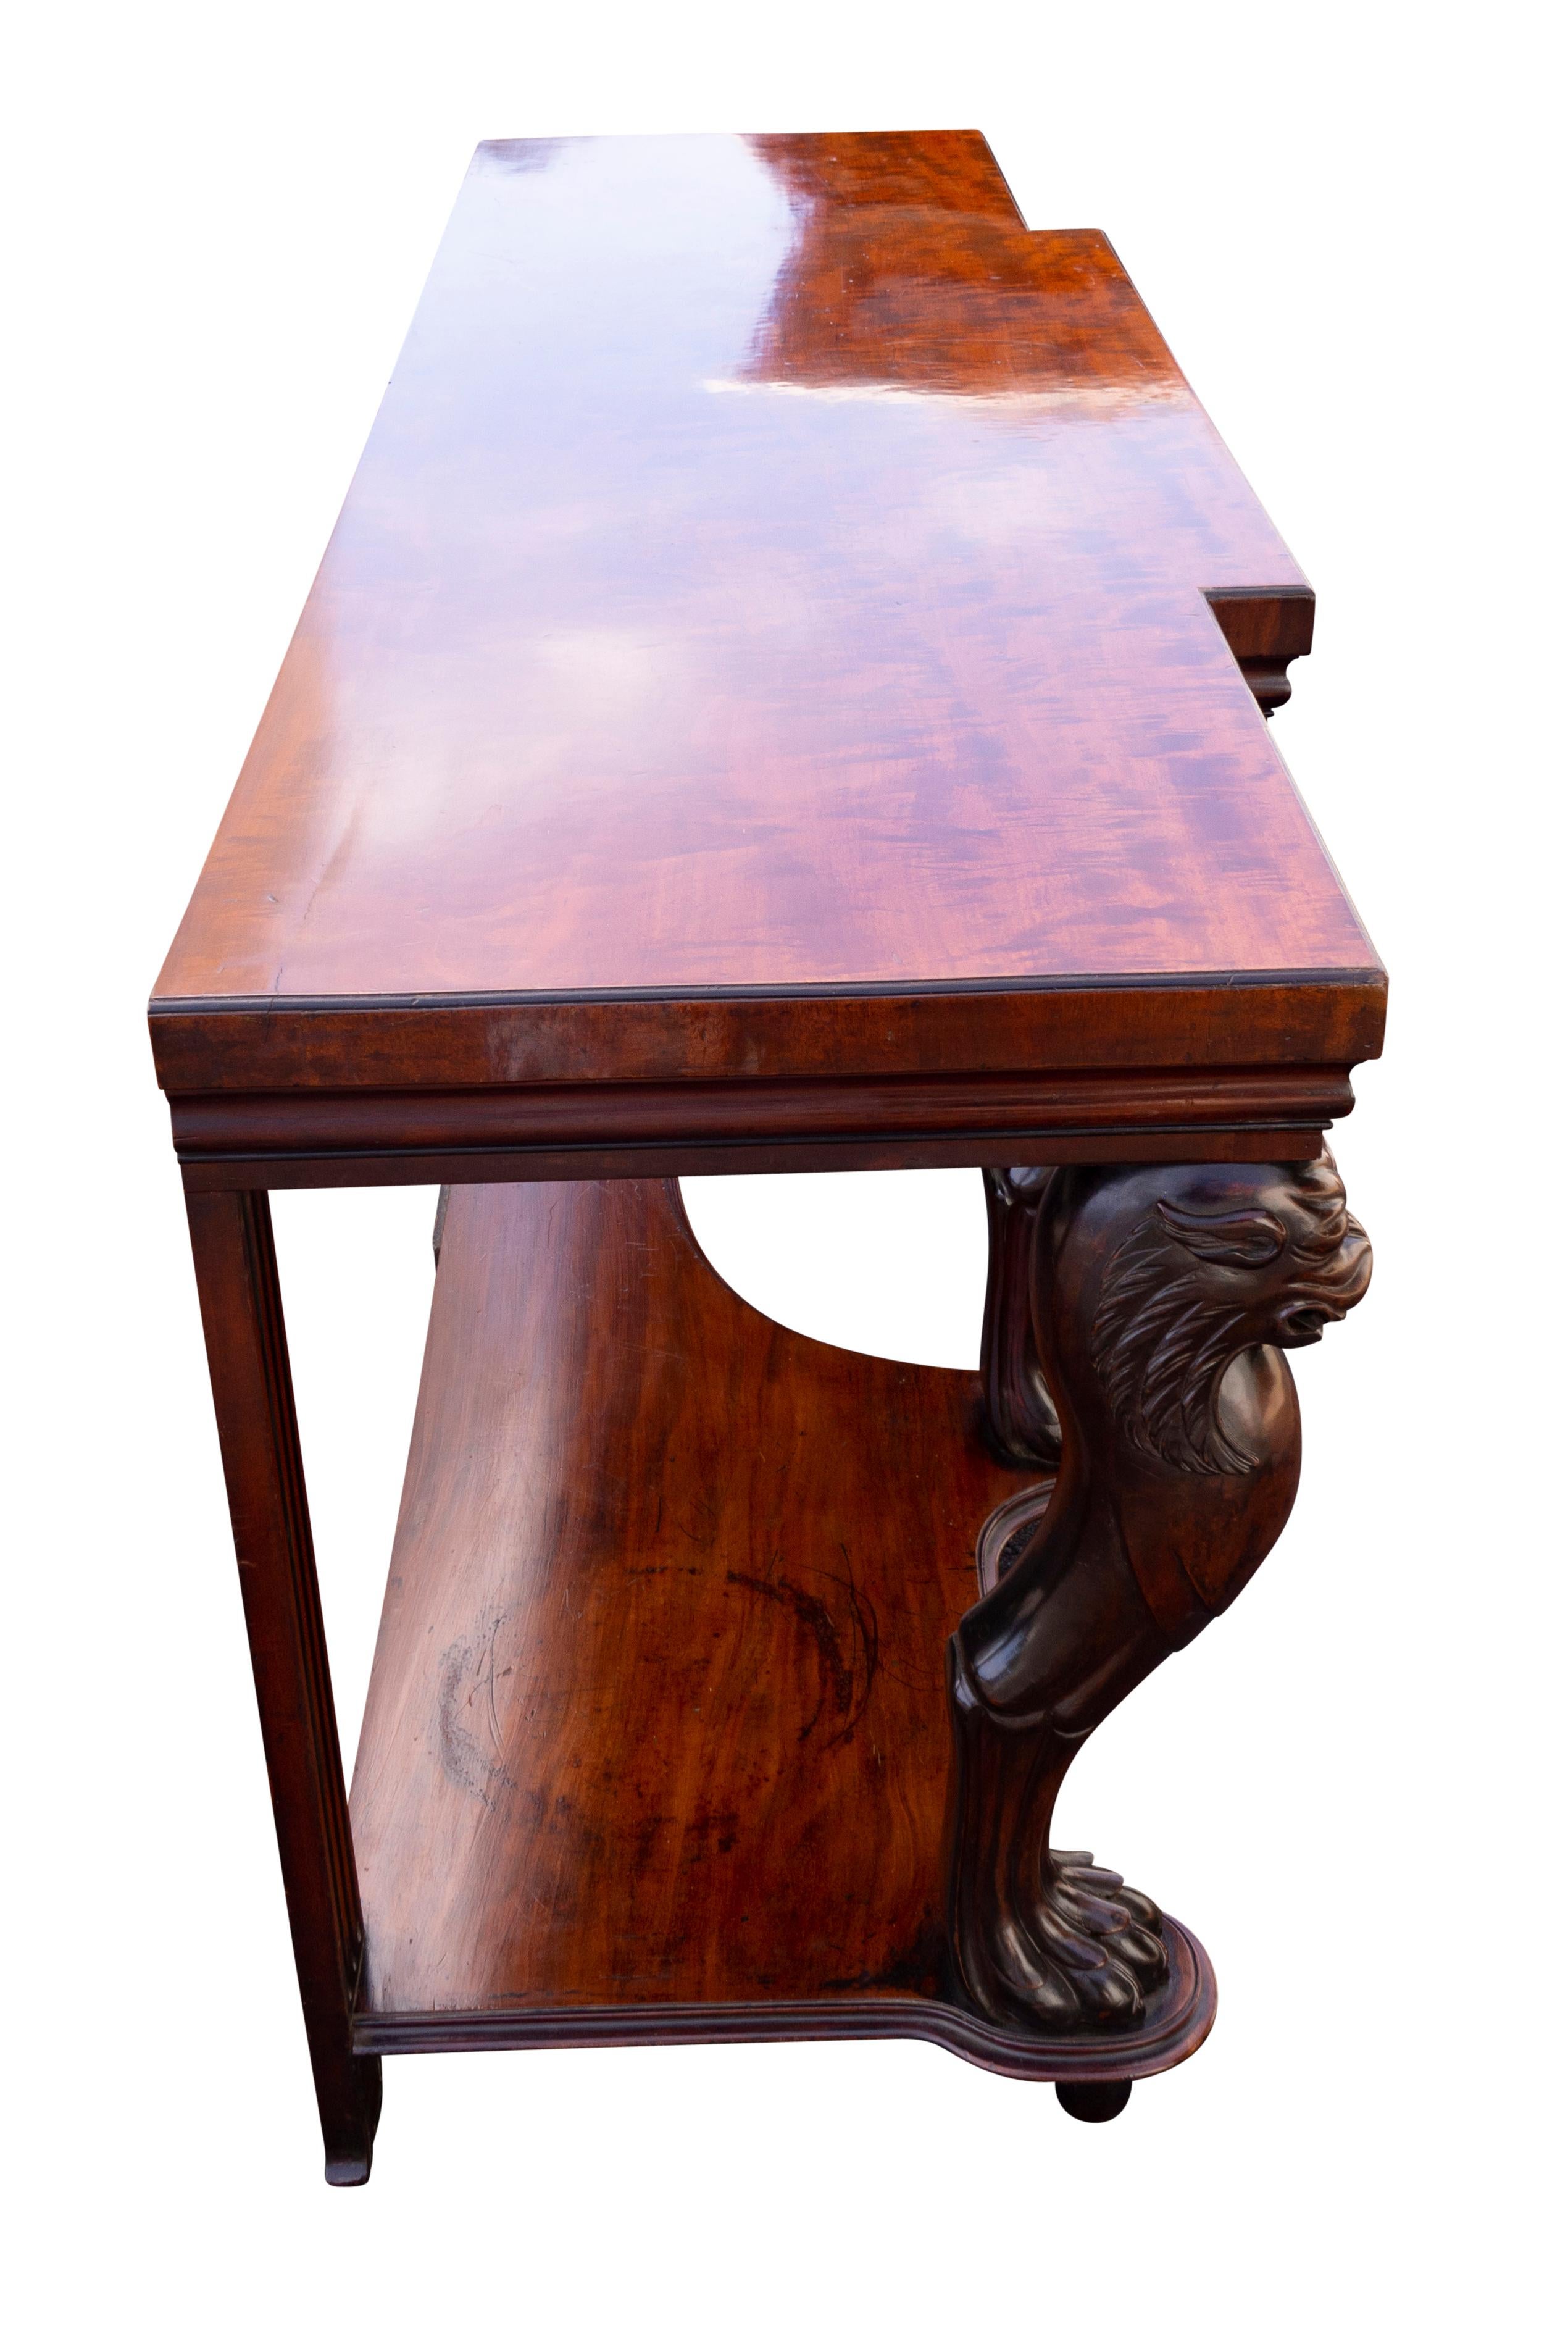 Early 19th Century Regency Mahogany Serving Table For Sale